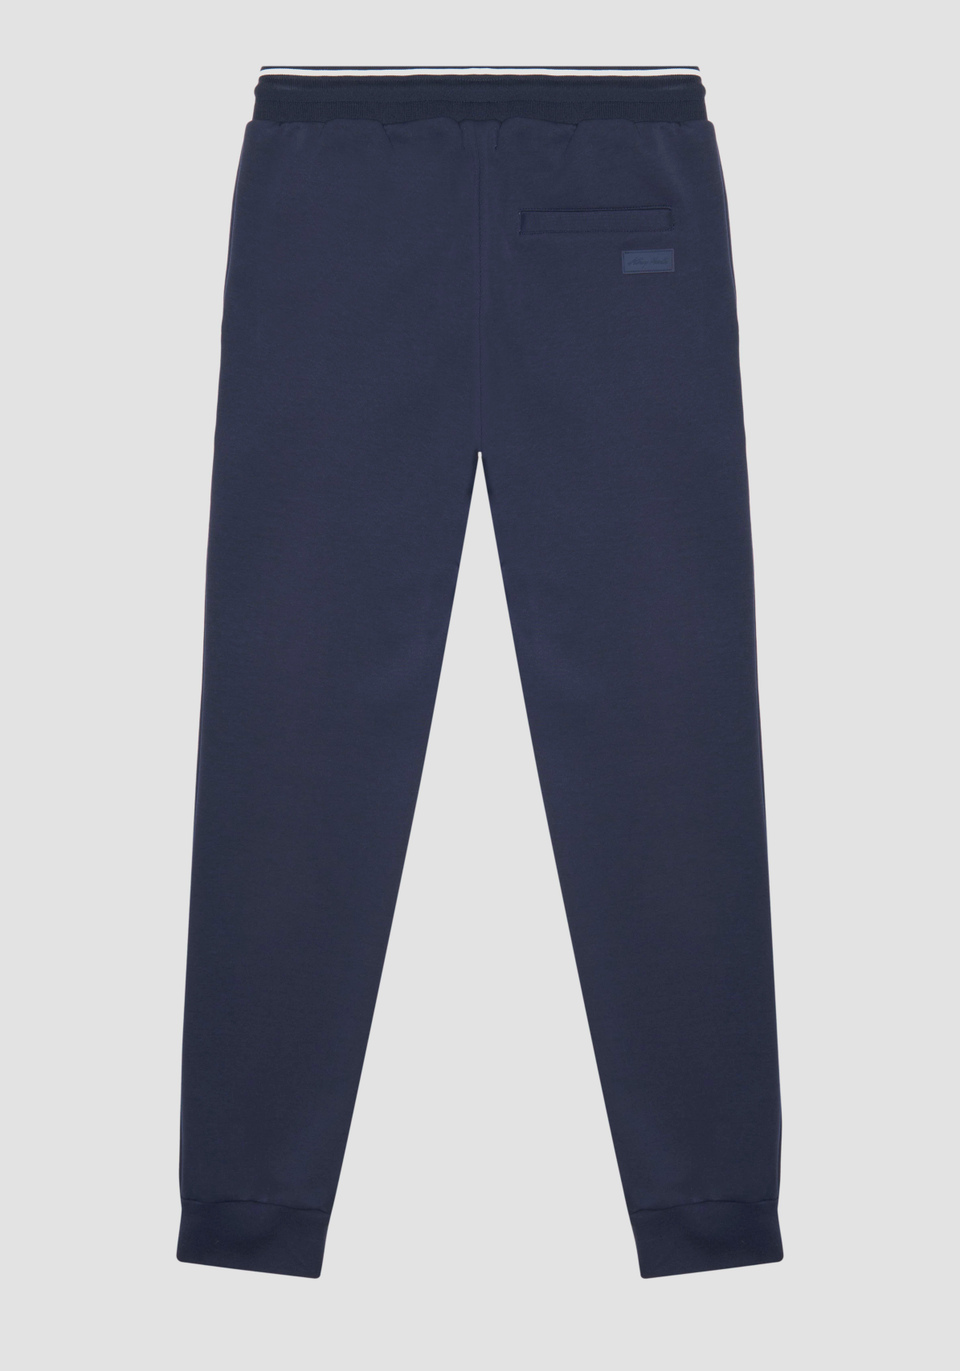 SLIM FIT SWEATPANTS IN COTTON BLEND WITH LOGO PATCH ON THE BACK - Antony Morato Online Shop